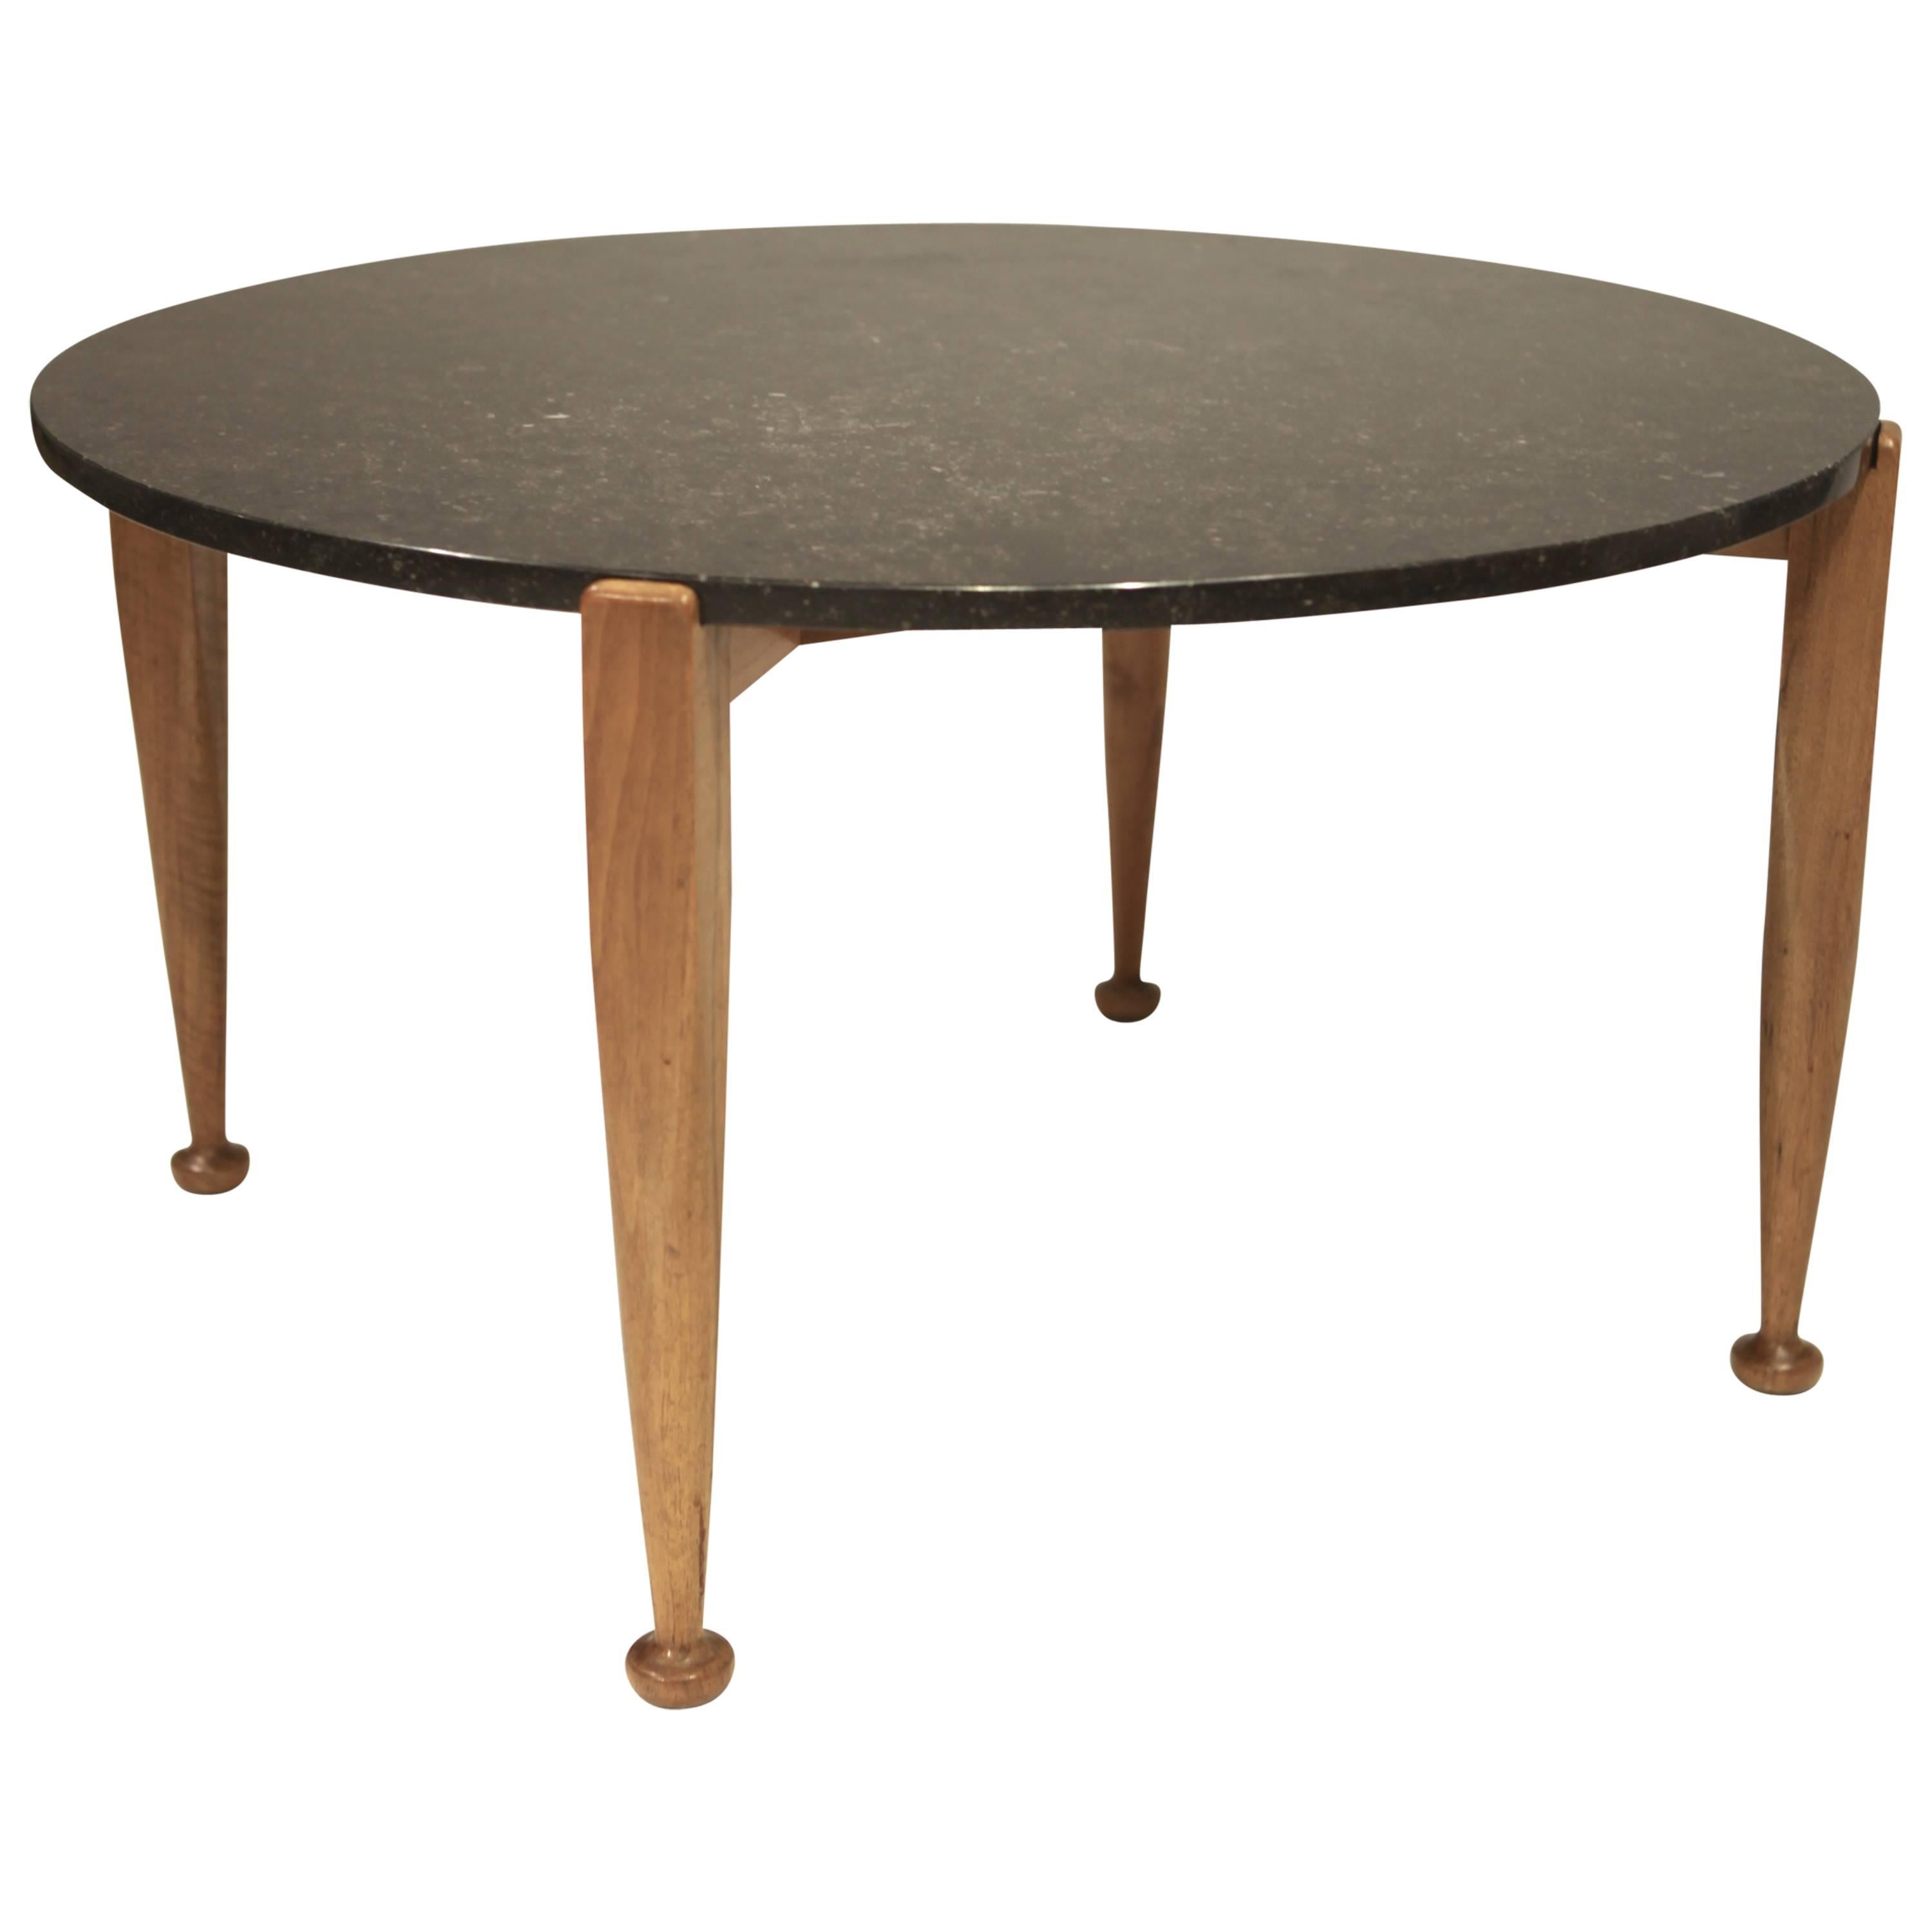 Josef Frank Coffee Table in Black Marble and Walnut, 1950 For Sale